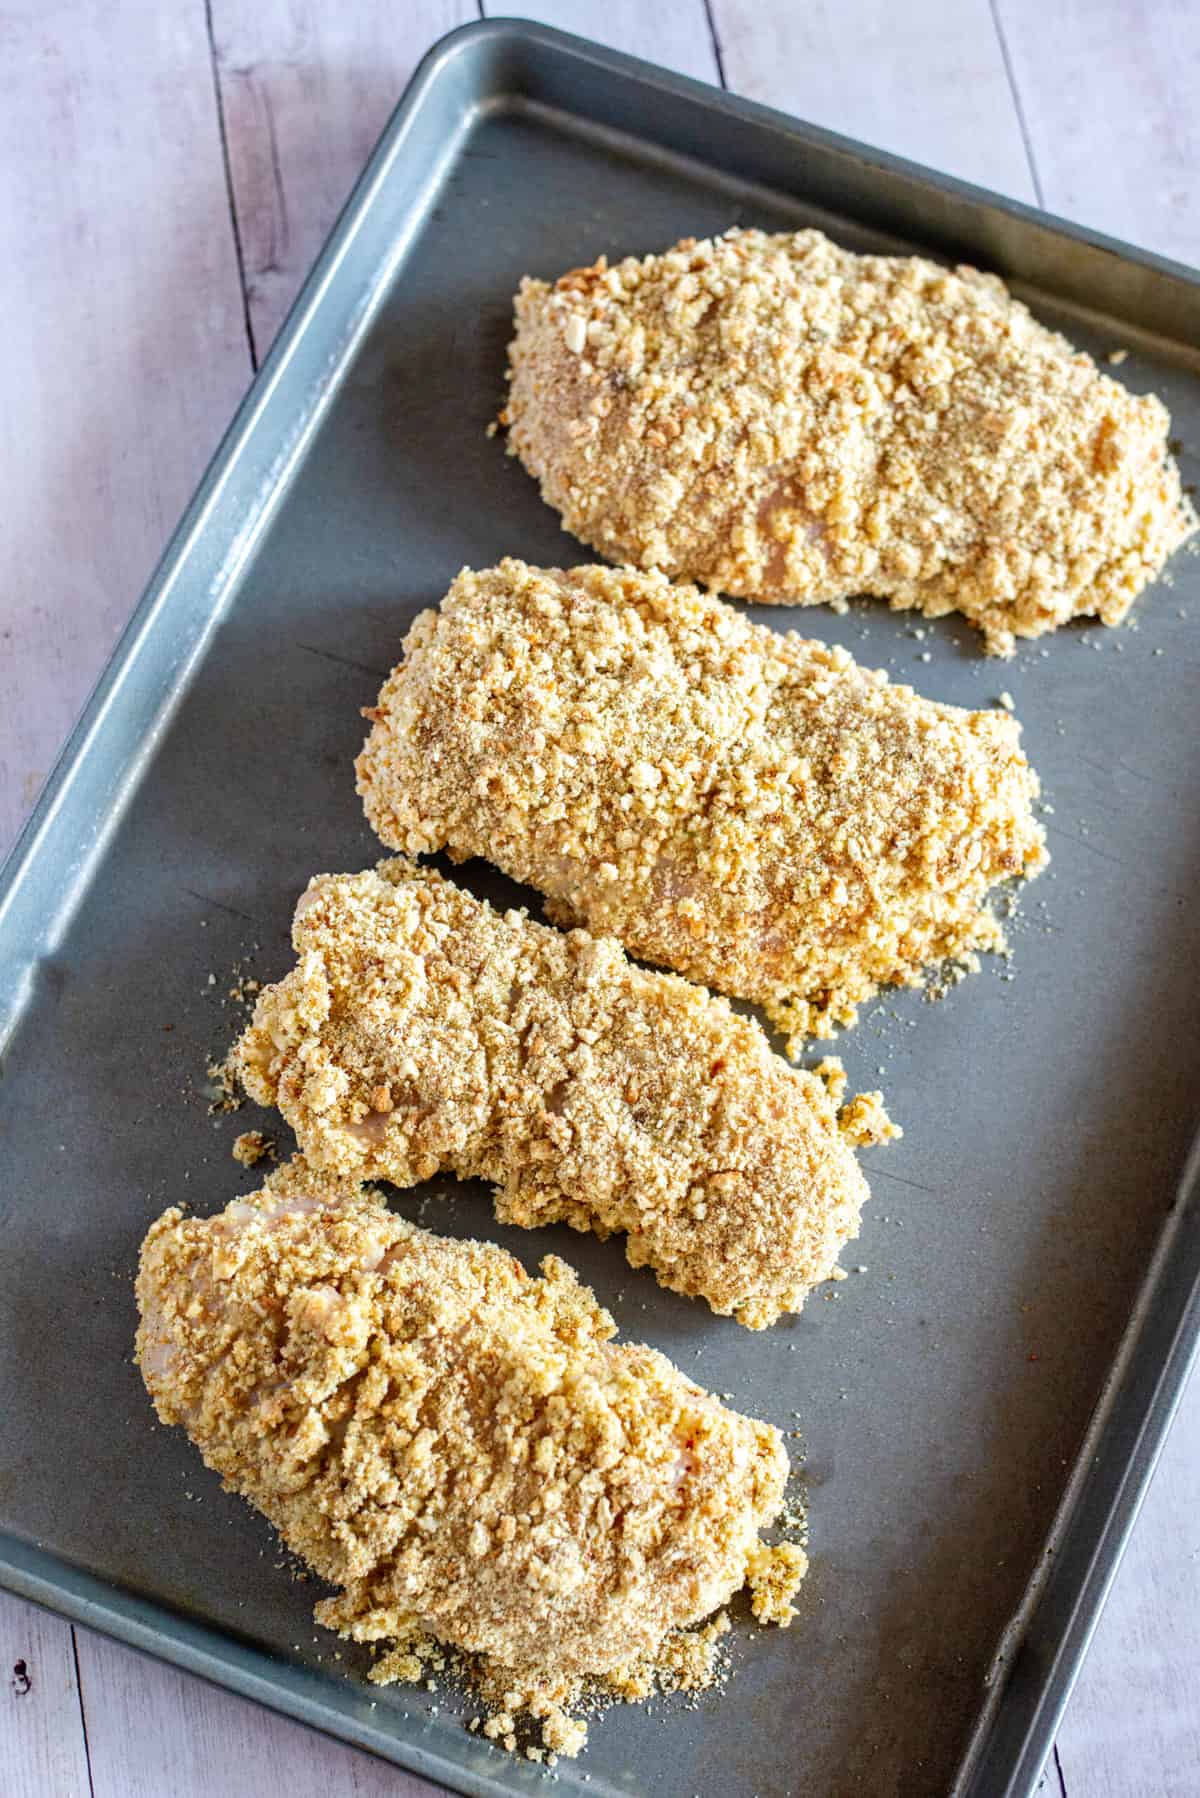 place stuffing-coated chicken on a baking sheet